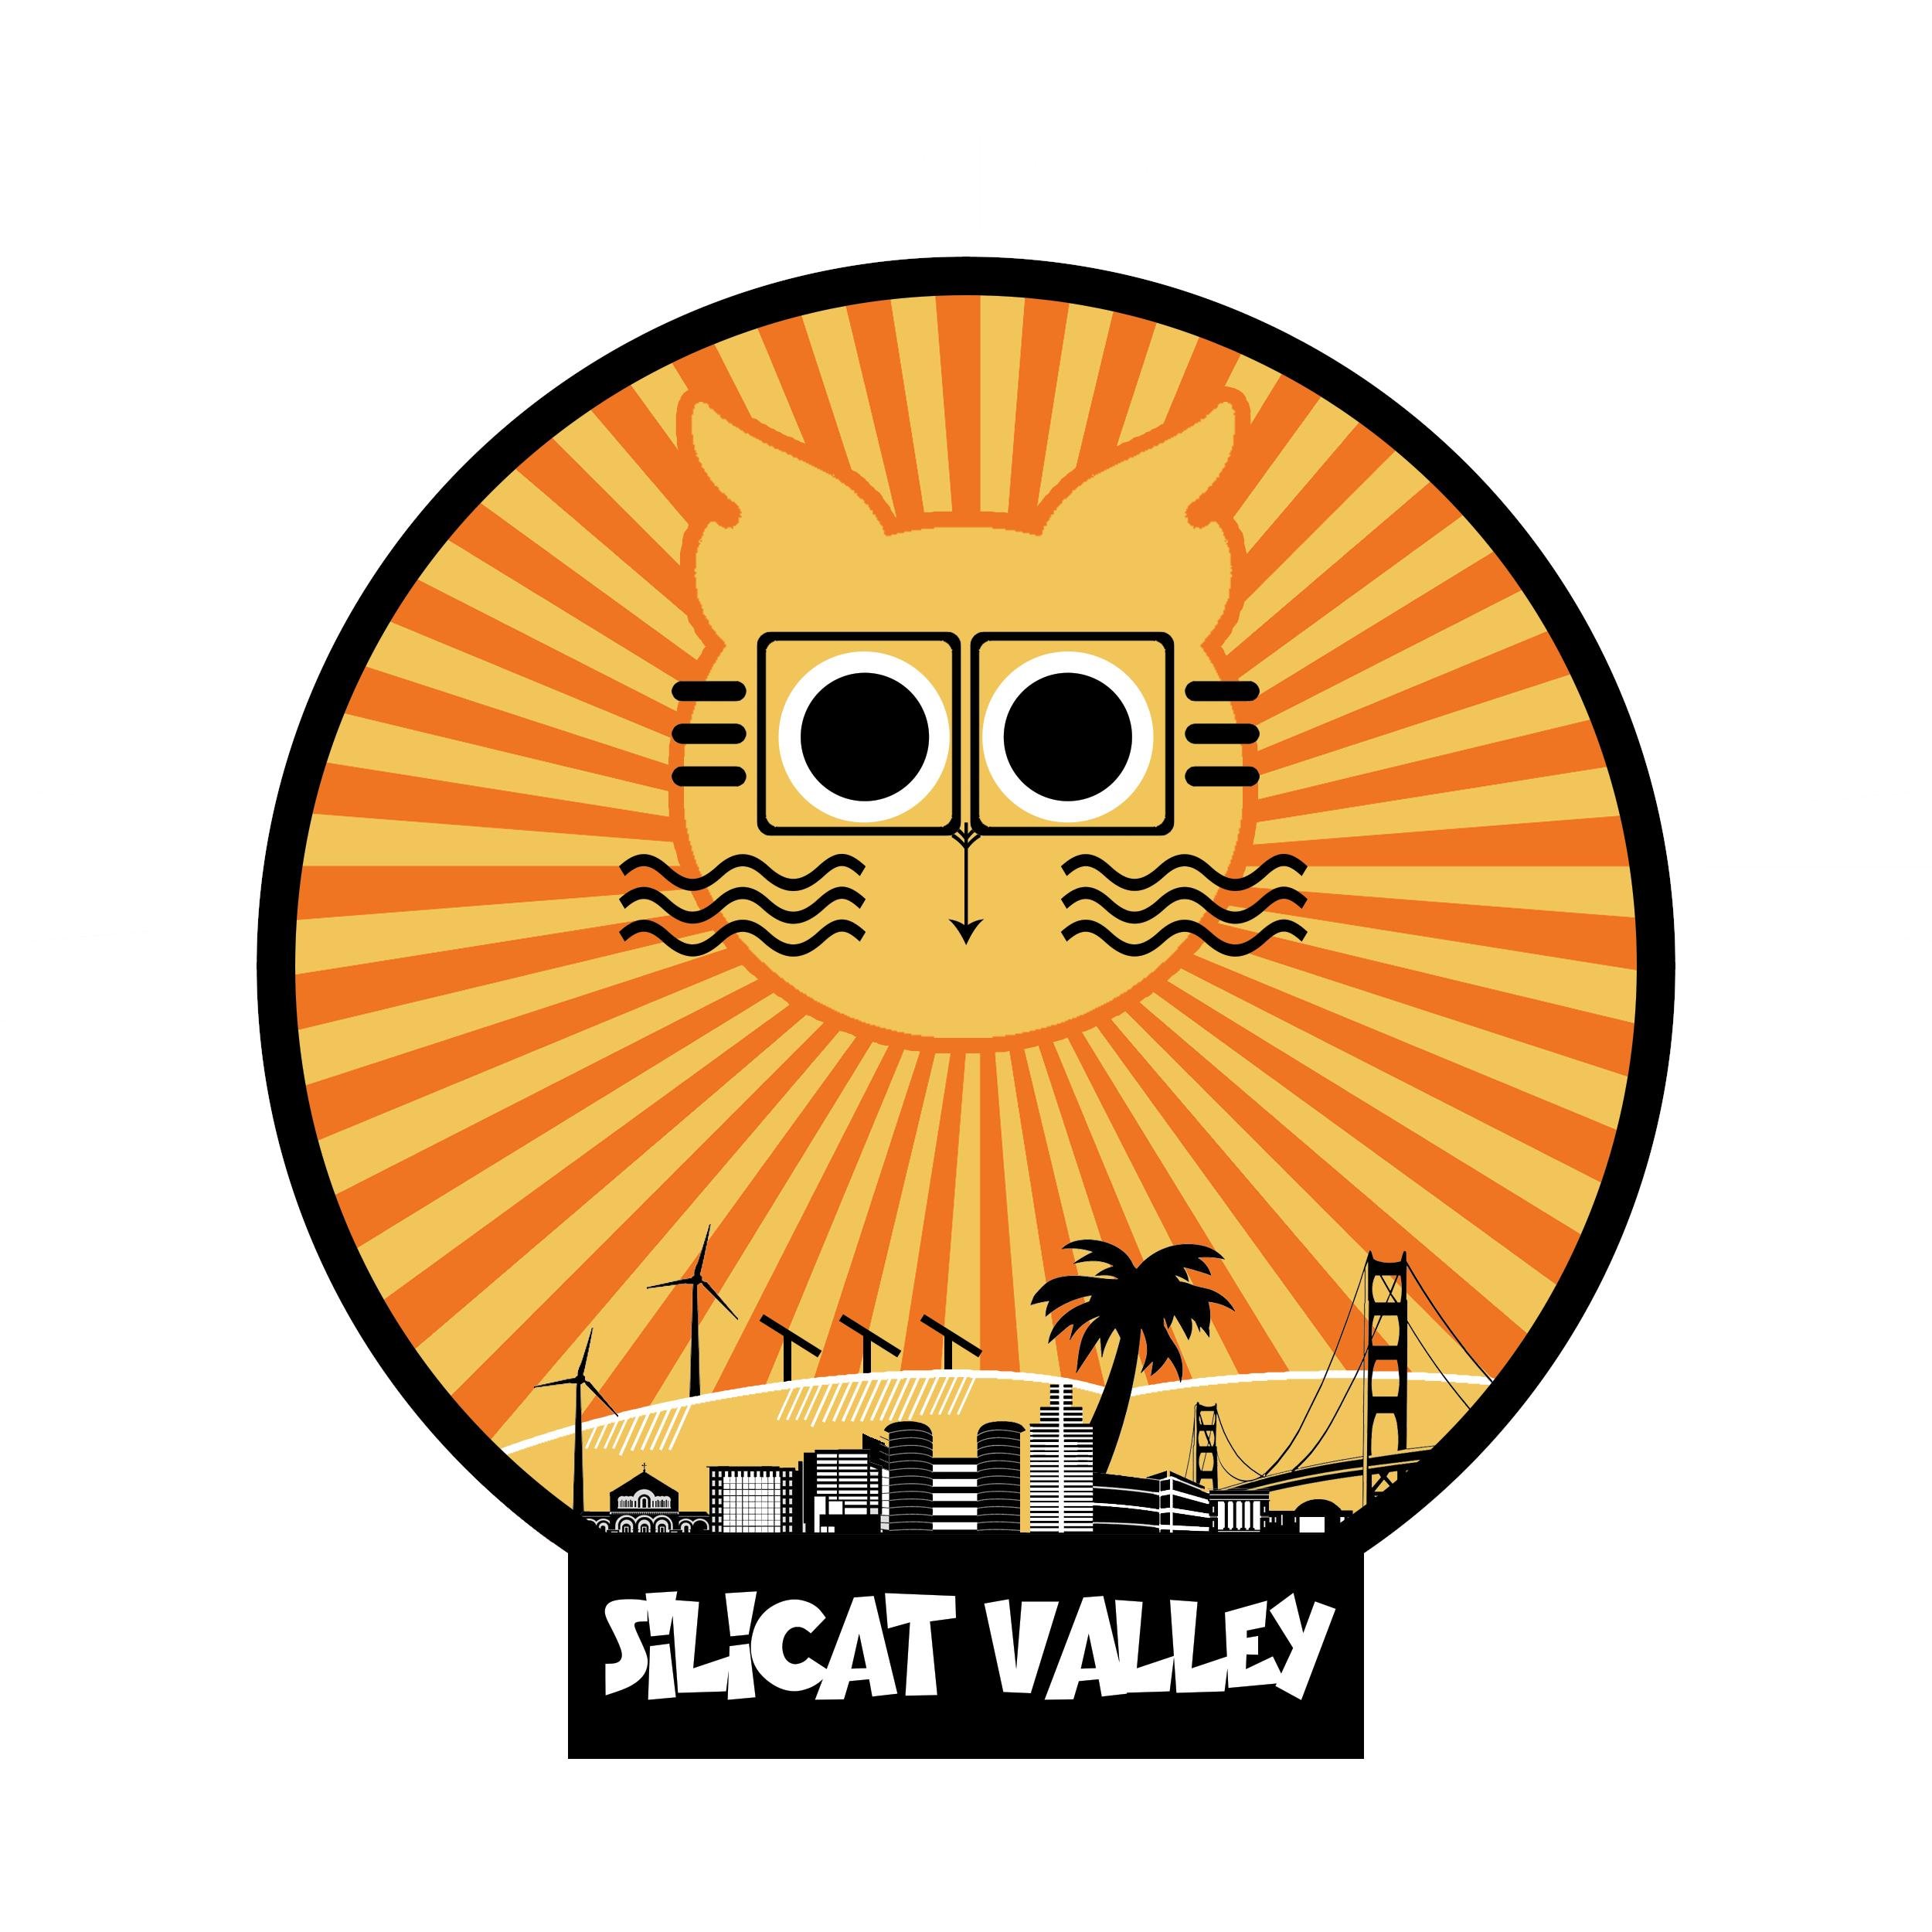 Silicat Valley debuted in San Jose, CA on July 27-28, 2019. COVID-19 has postponed all future events. check back in the future for new shows.